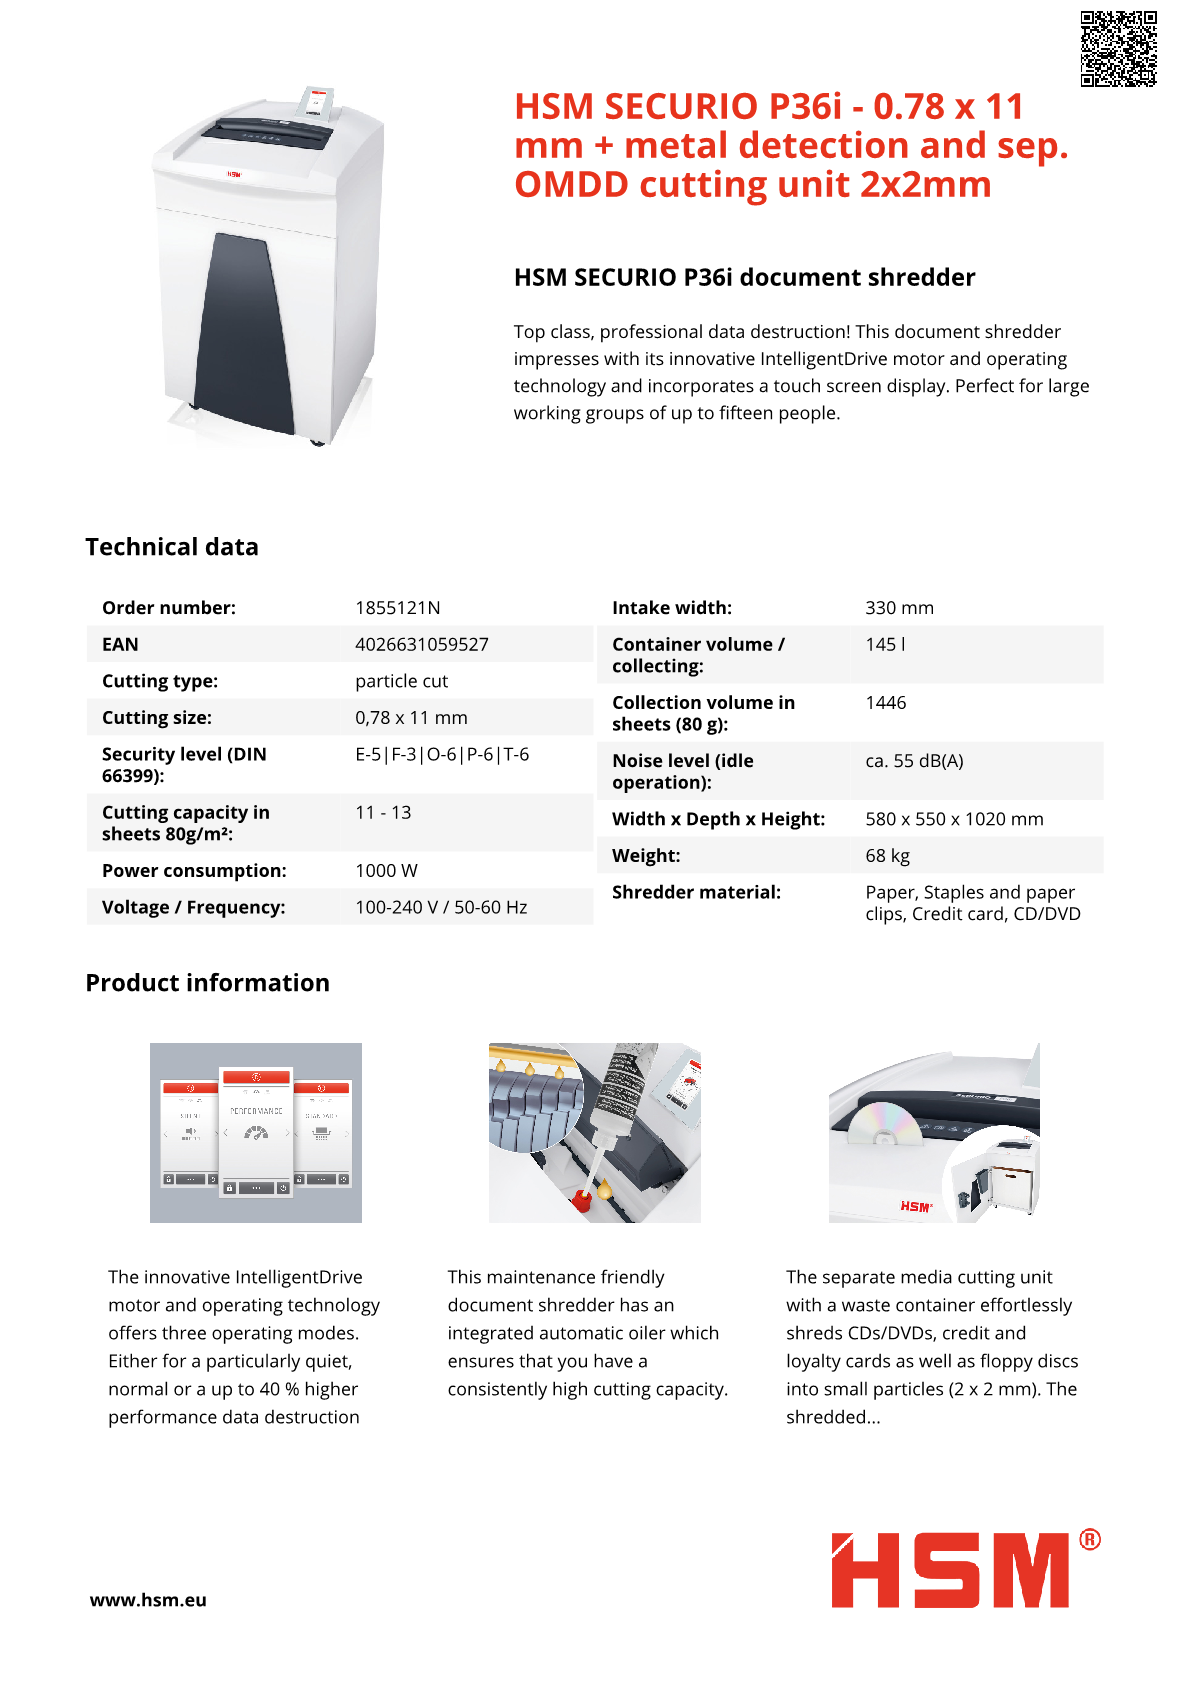 hsm-securio-p36i-0.78-x-11-mm-metal-detection-and-sep.-omdd-cutting-unit-2x2mm1.png